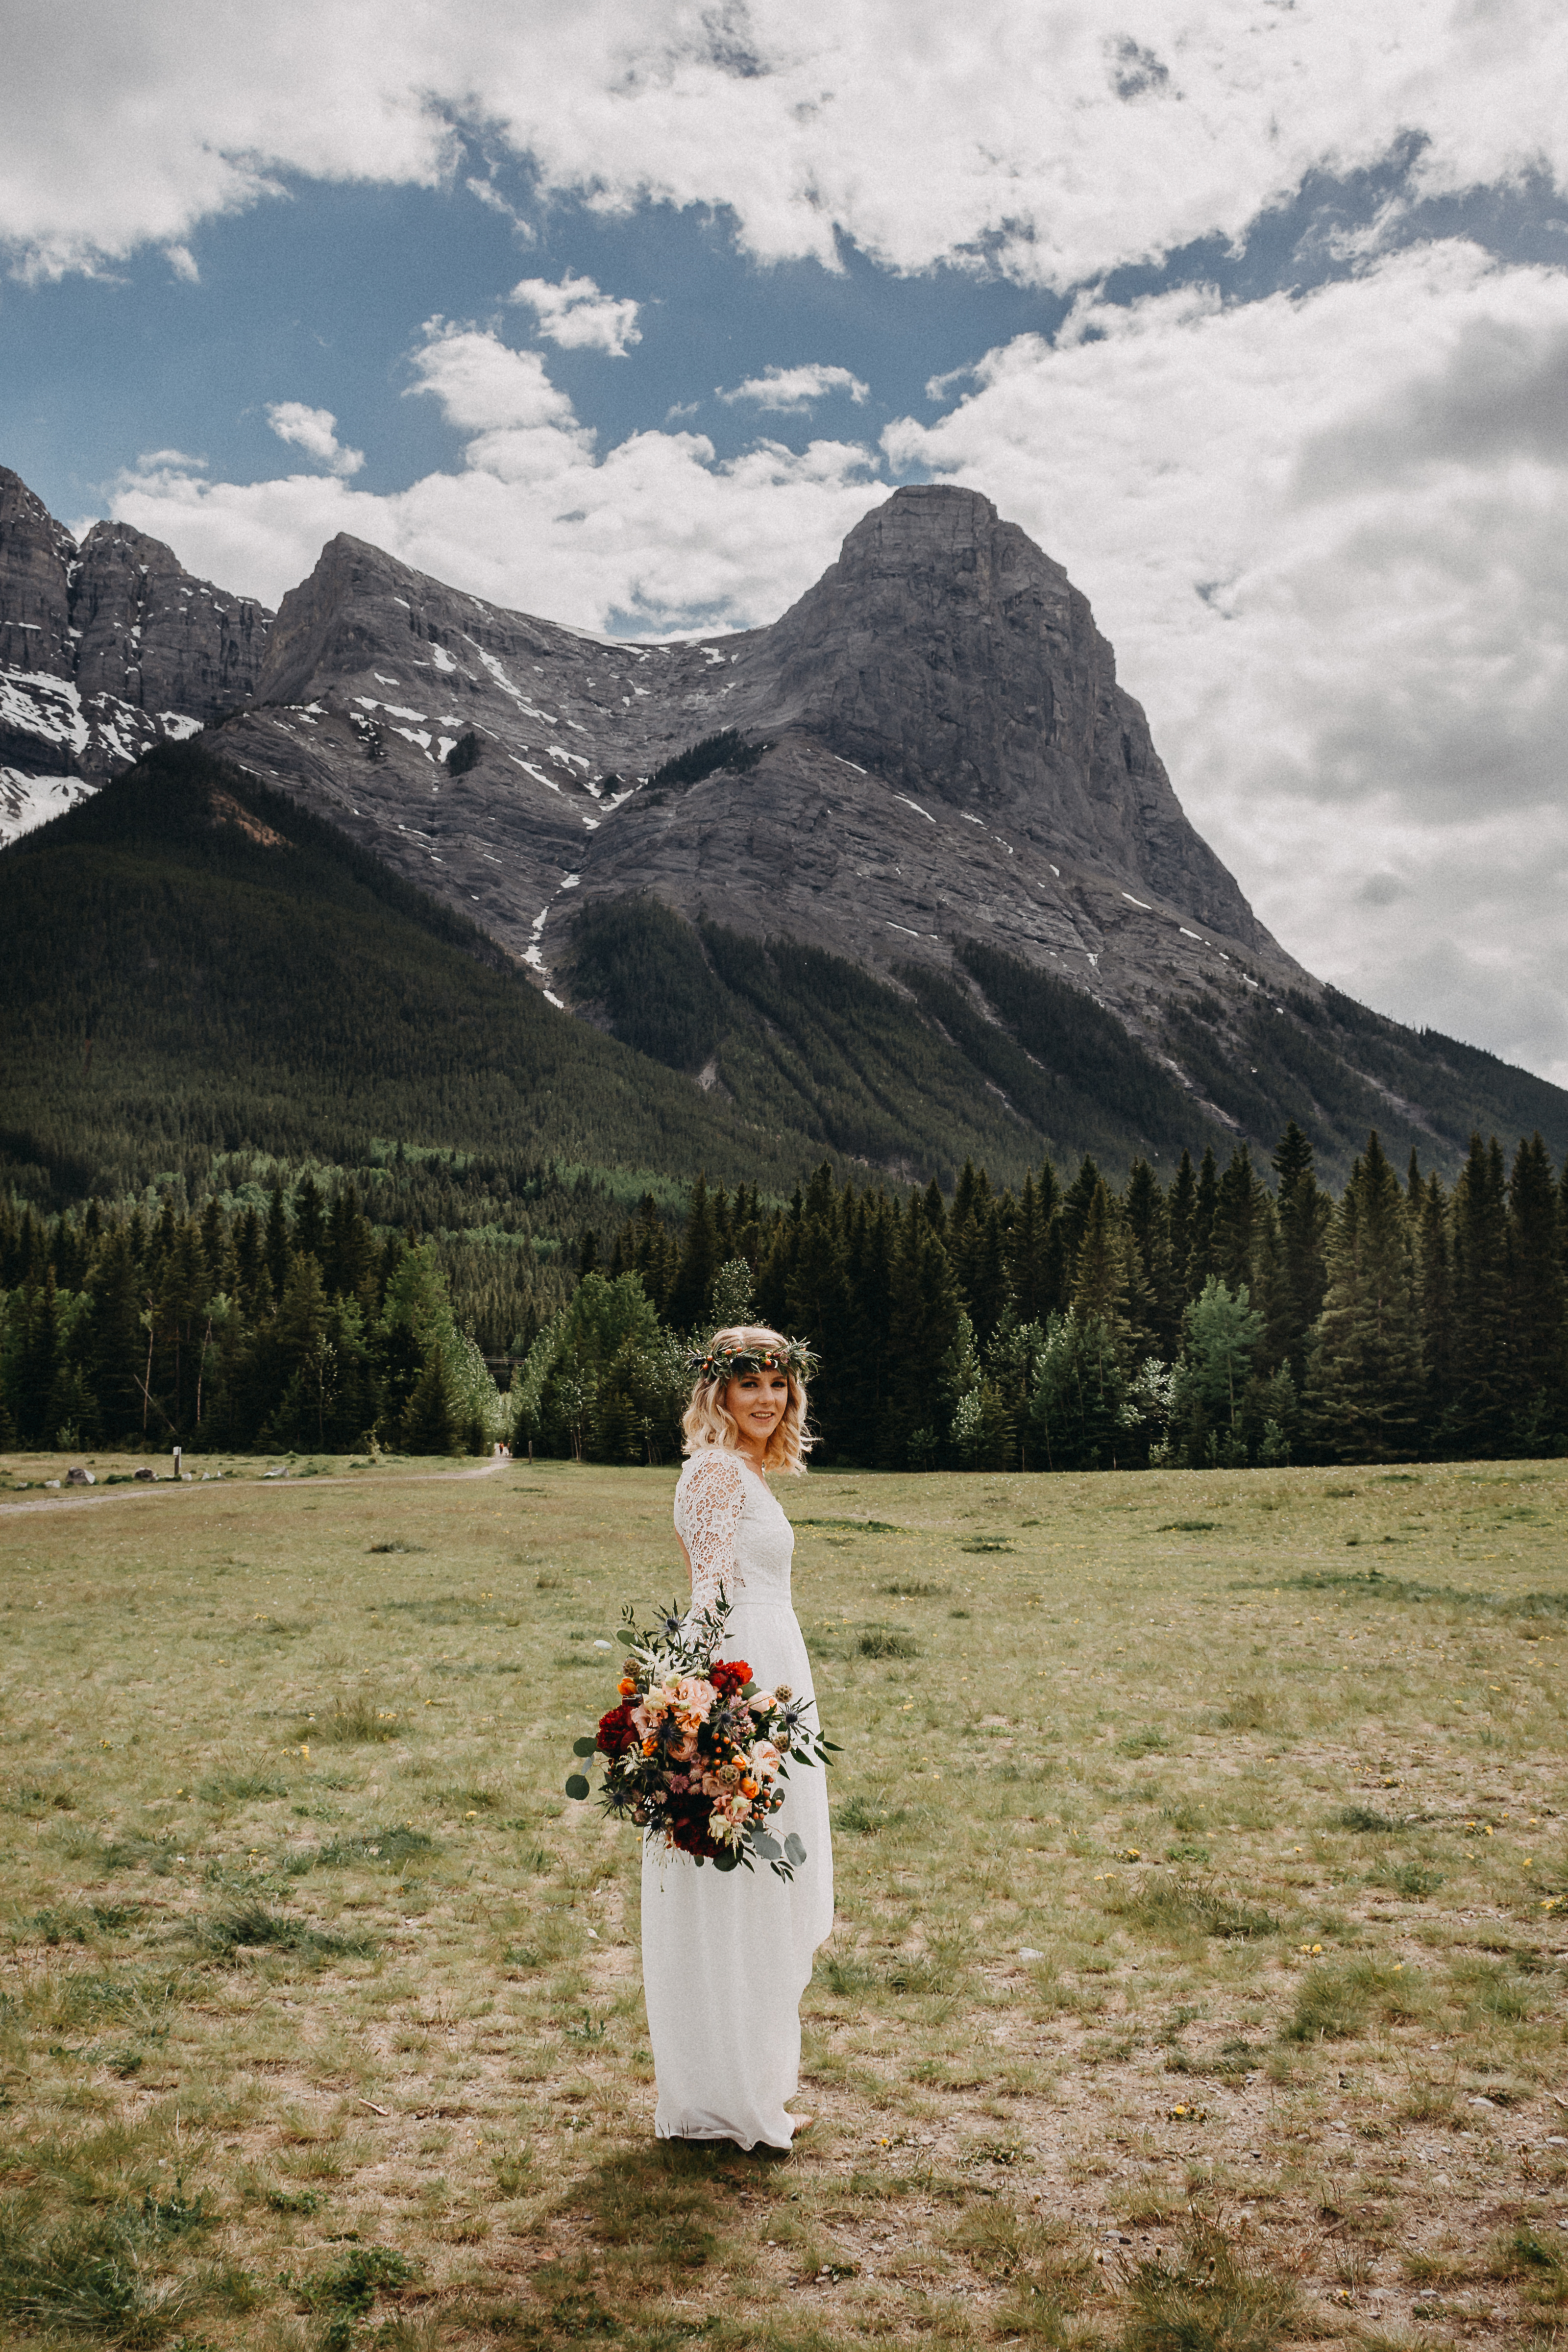 The bride posing in front of the rocky mountains with her floral bouquet